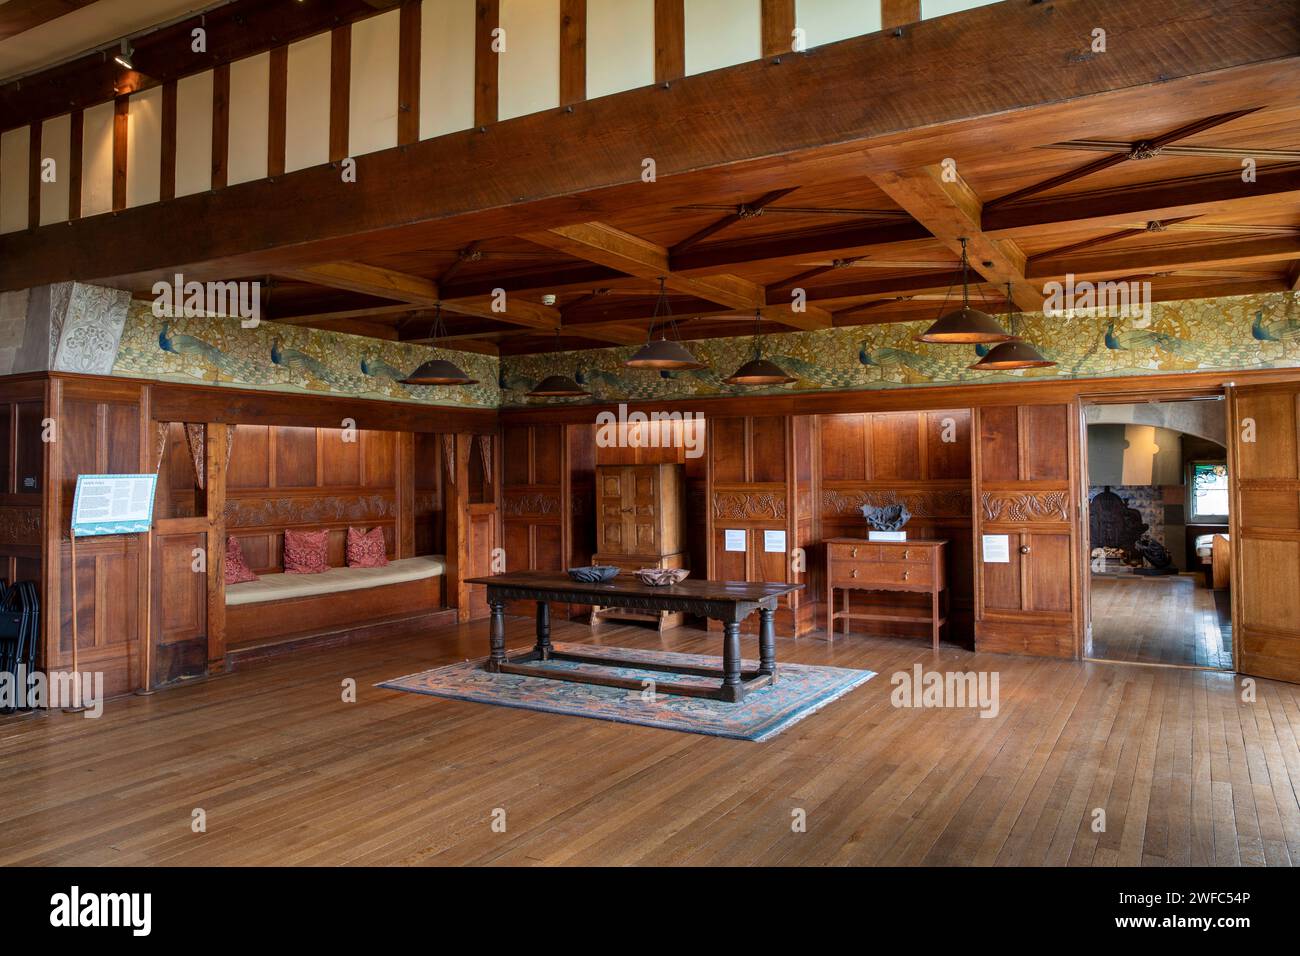 UK, Cumbria, Bowness on Windermere, Blackwell, Arts and Crafts House, Main Hall interior Stock Photo